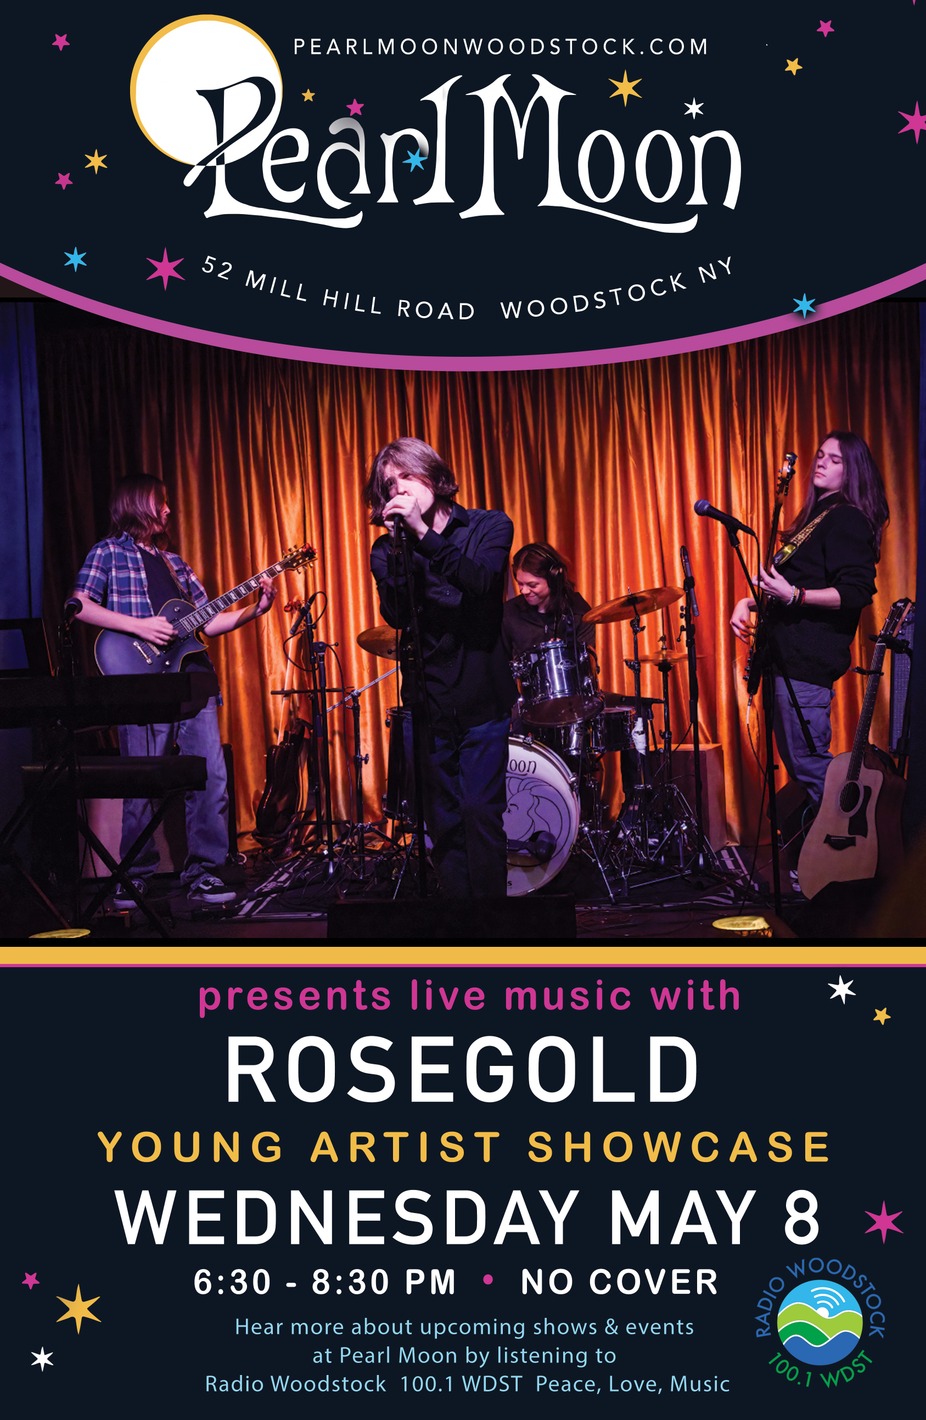 YOUNG ARTIST SHOWCASE with ROSEGOLD at PEARL MOON WOODSTOCK event photo